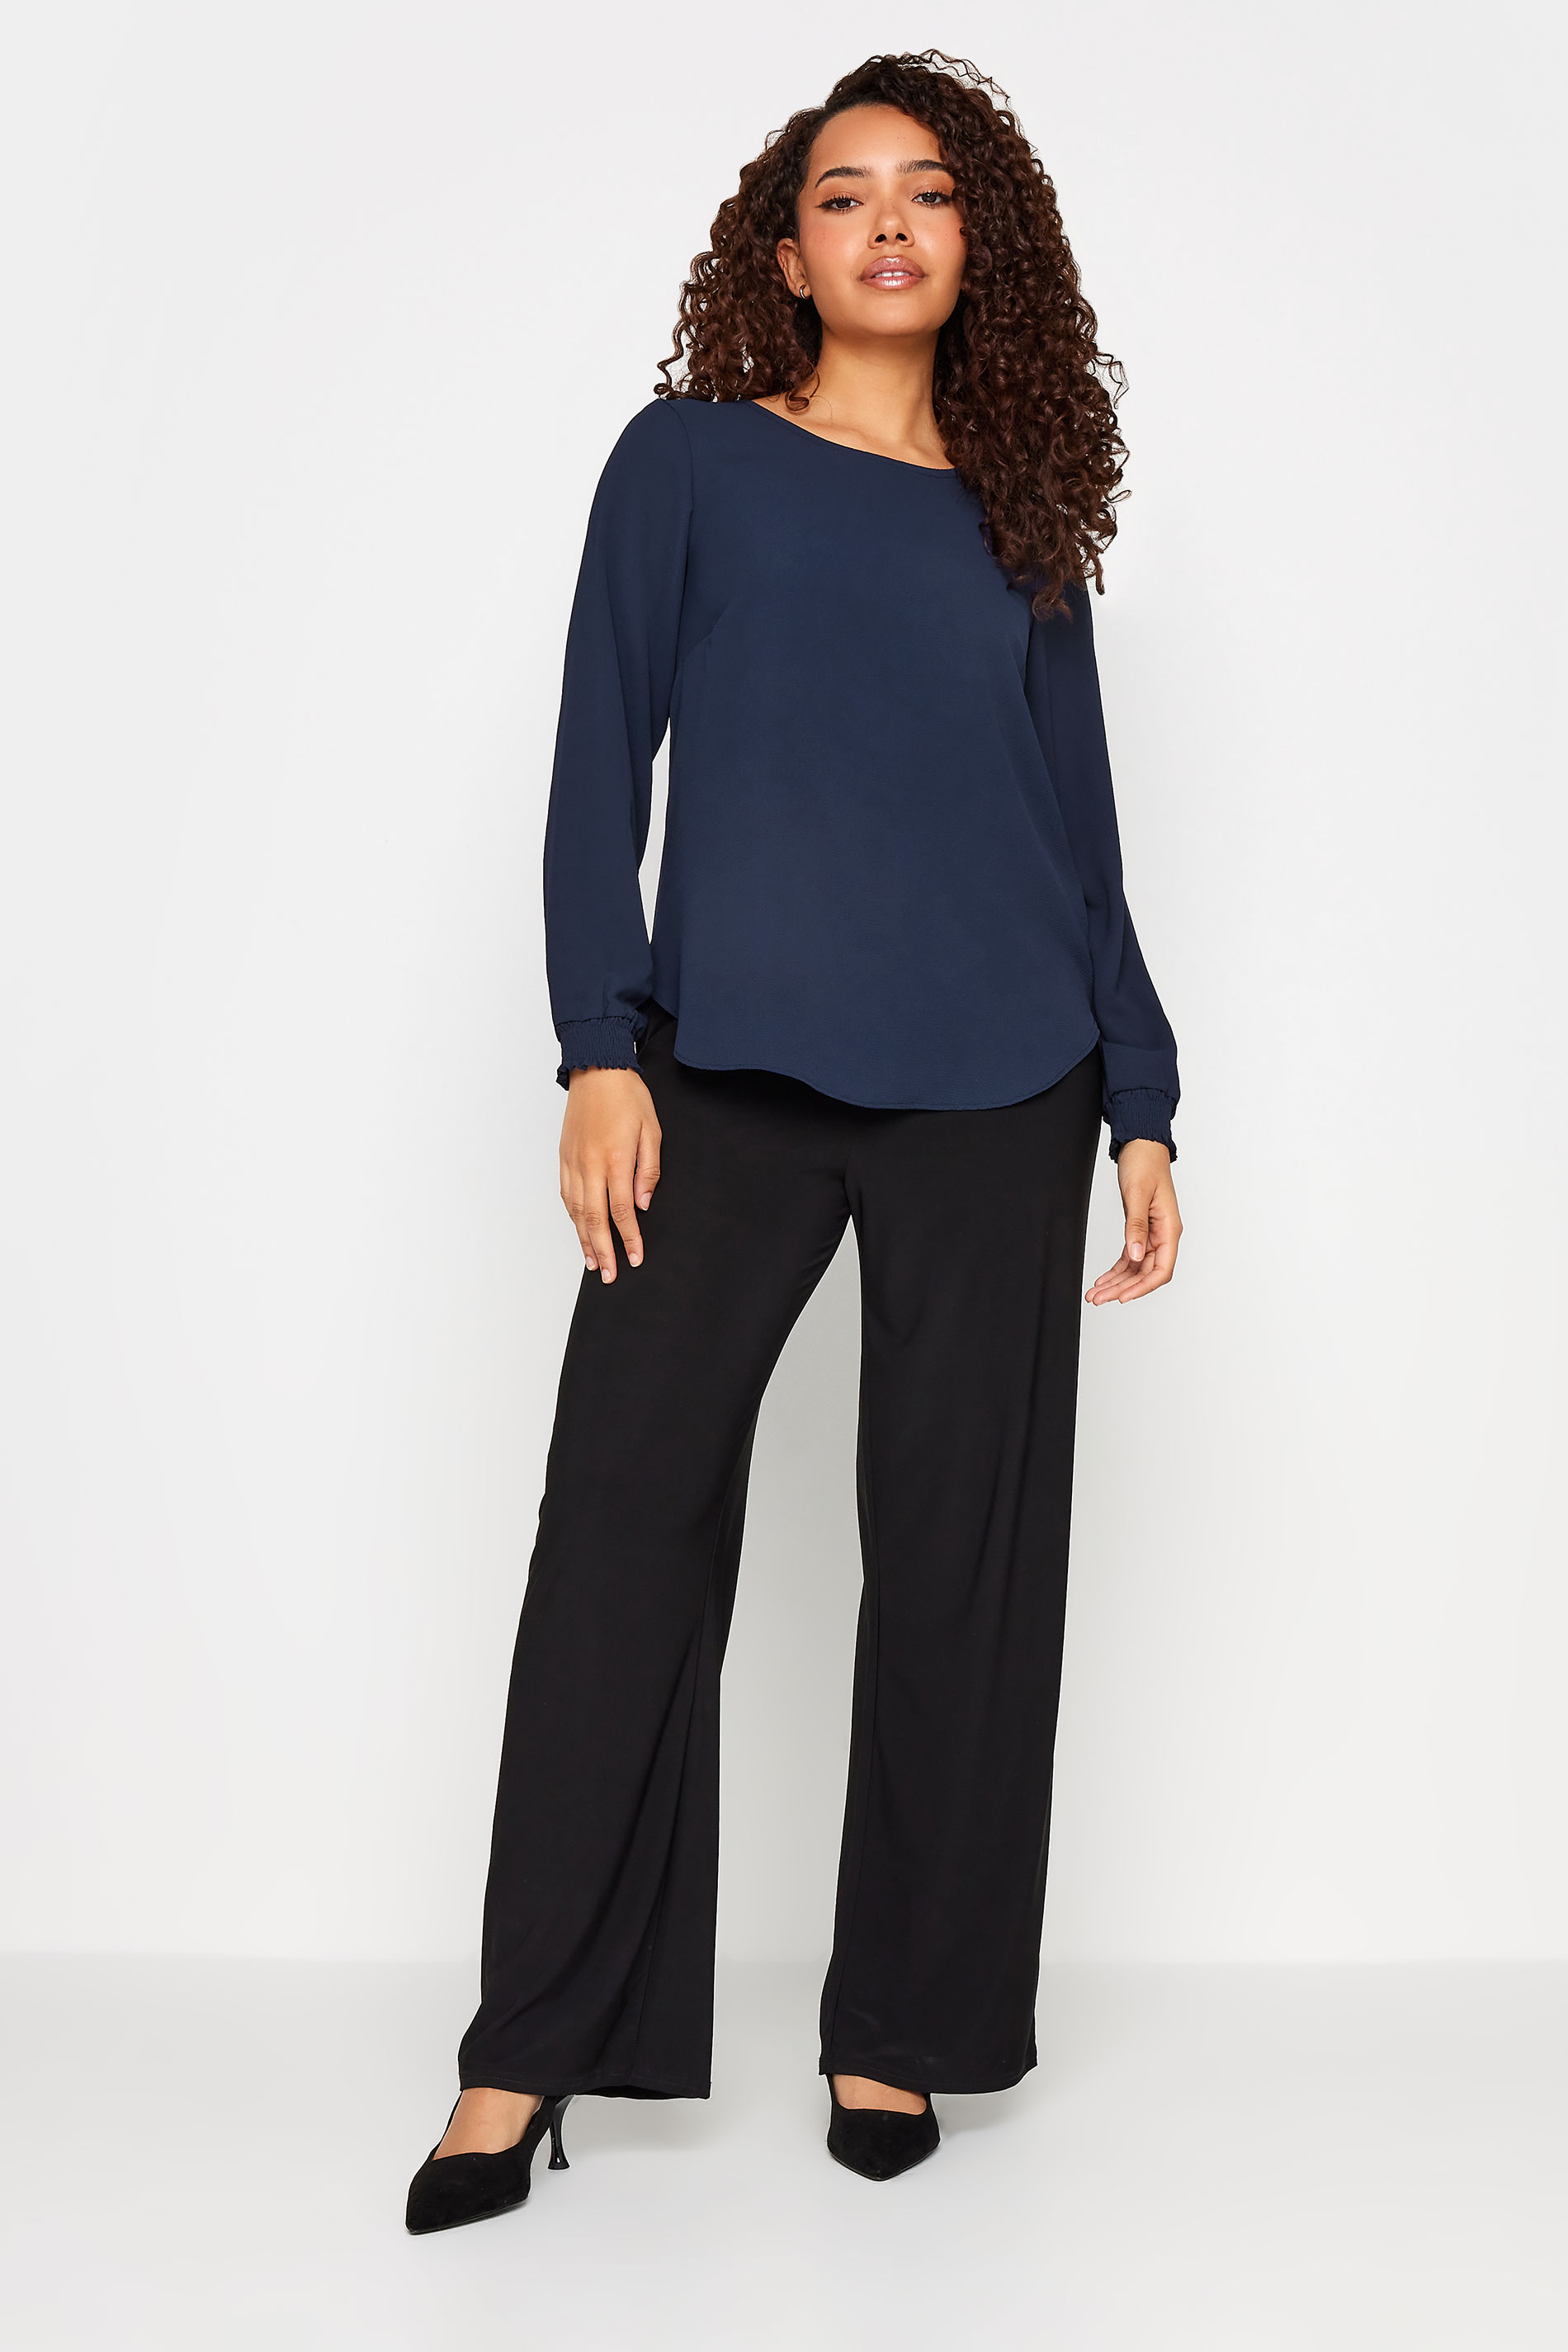 M&Co Navy Blue Shirred Cuff Blouse | M&Co 2